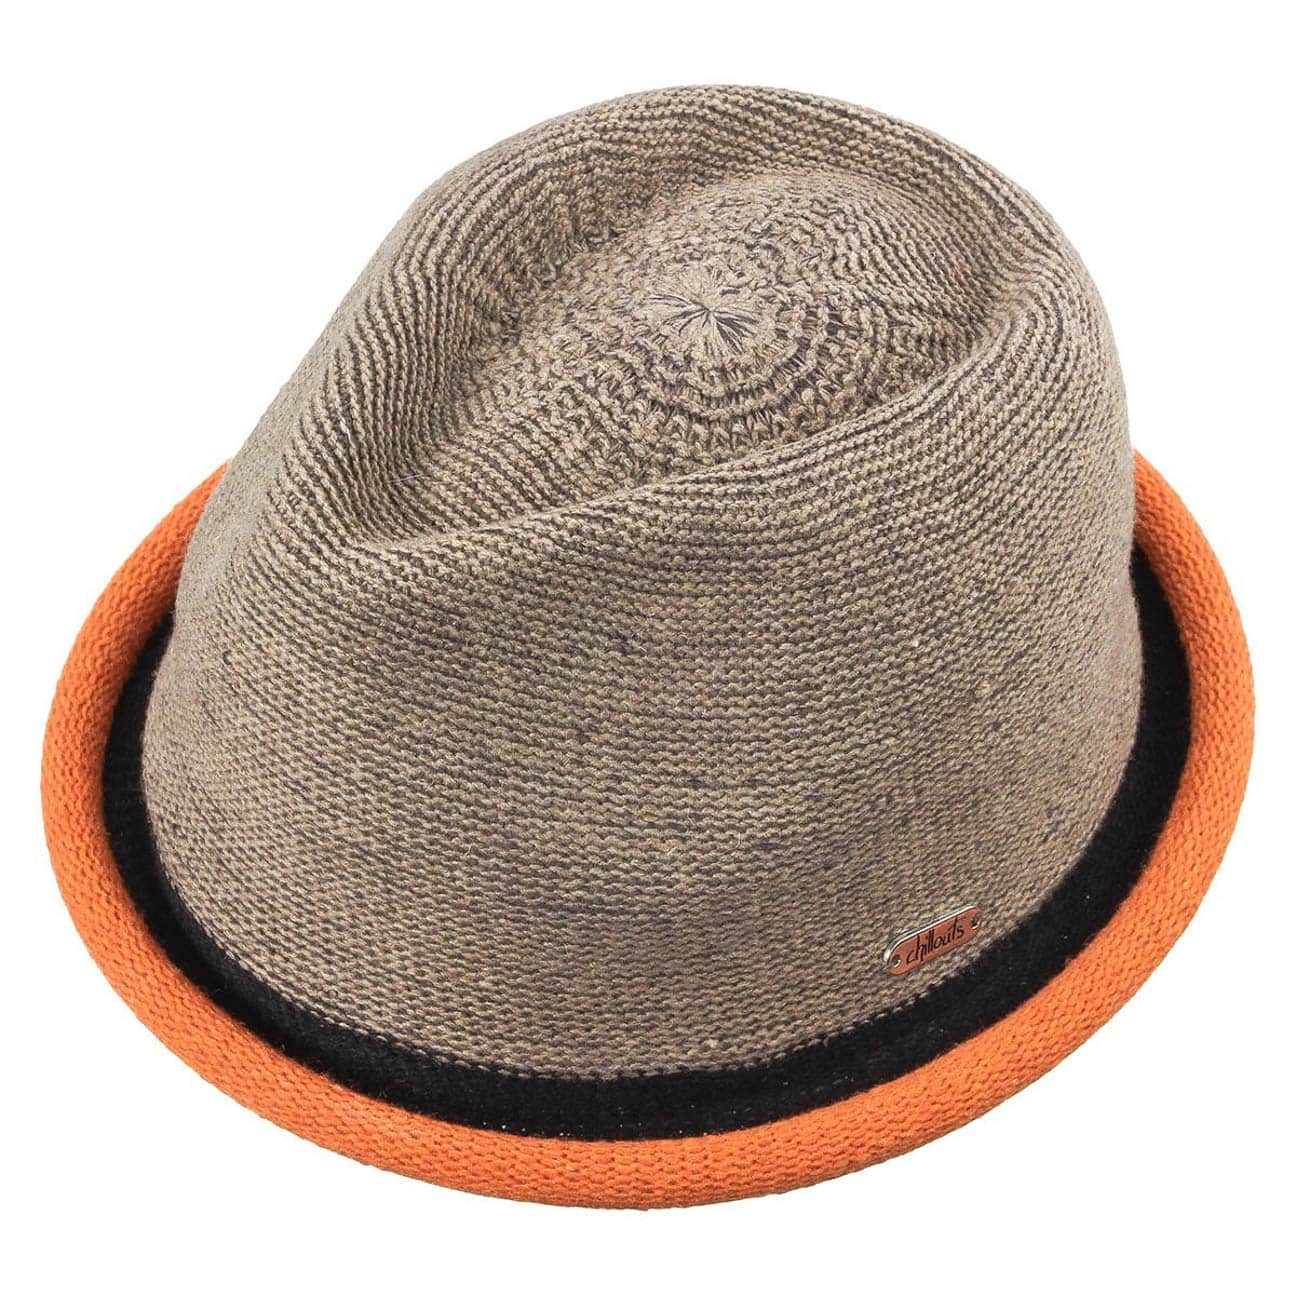 Boston Pork Pie Hat Chillouts cloth hat summer hat 4654 BOS03